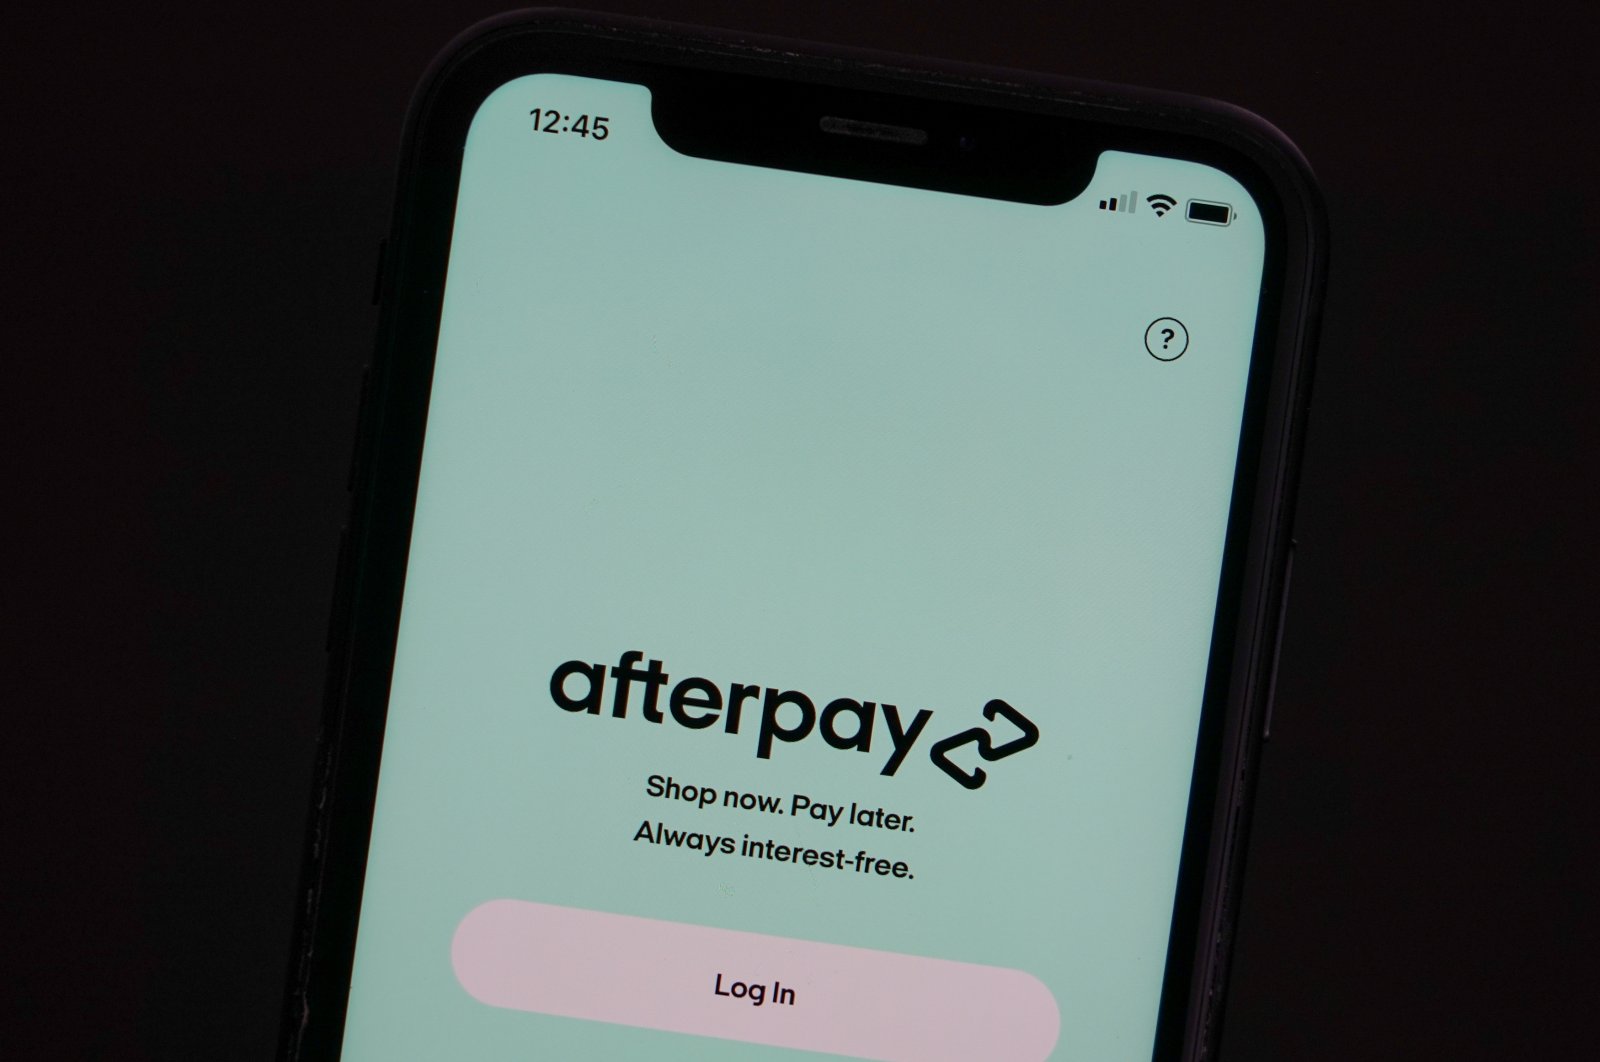 The Afterpay app is seen on the screen of a mobile phone in a picture illustration taken on Aug. 2, 2021. (Reuters Photo)